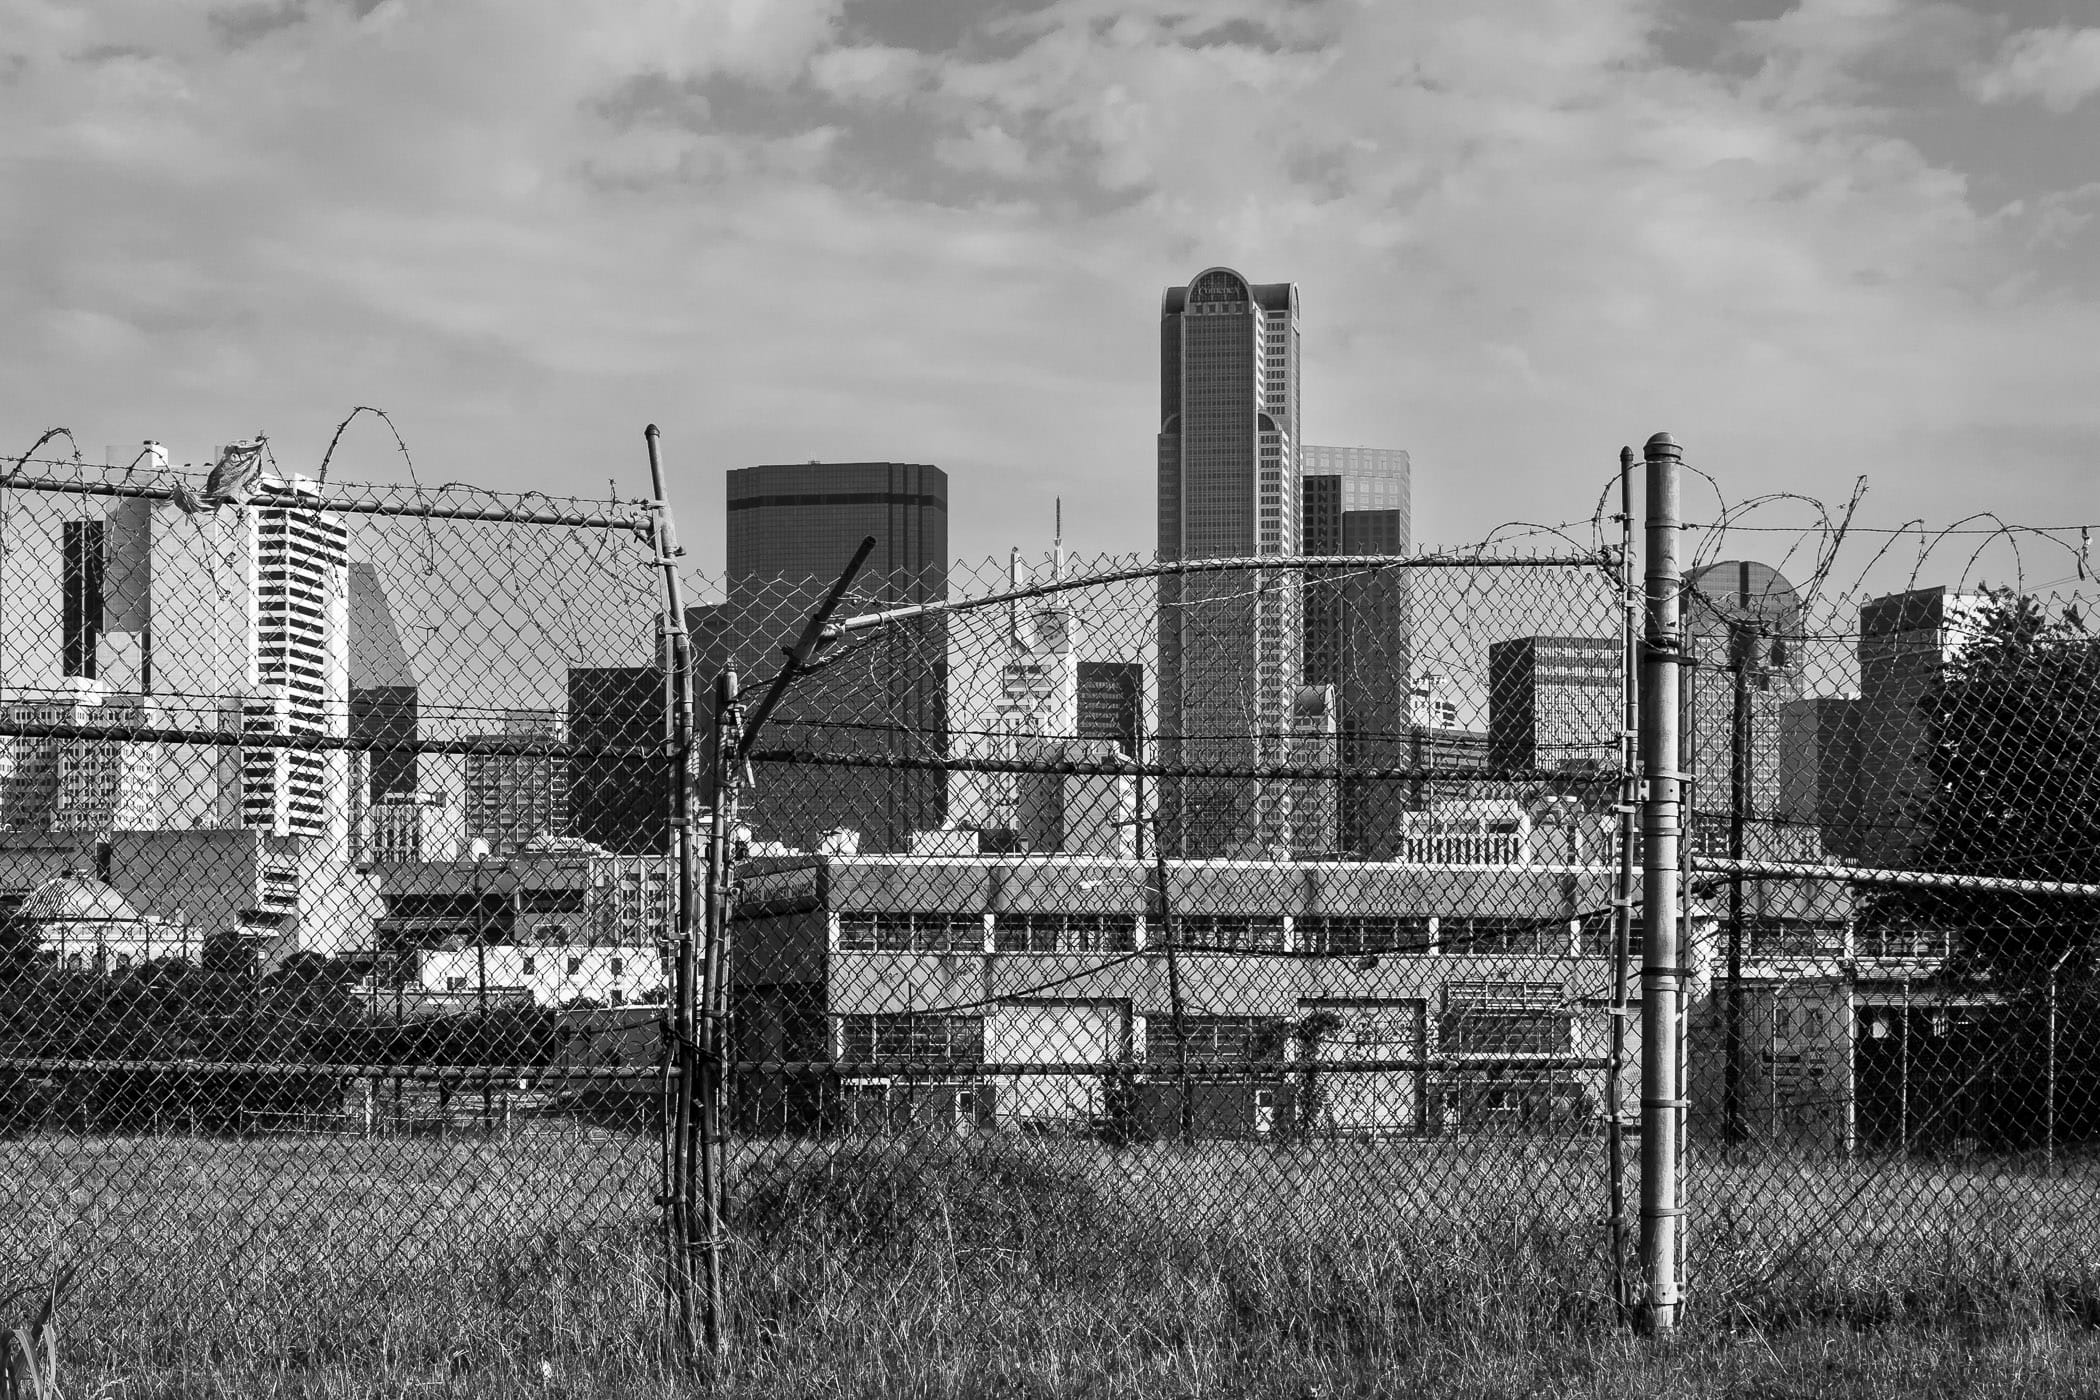 The Dallas Skyline as seen from an abandoned lot in The Cedars.